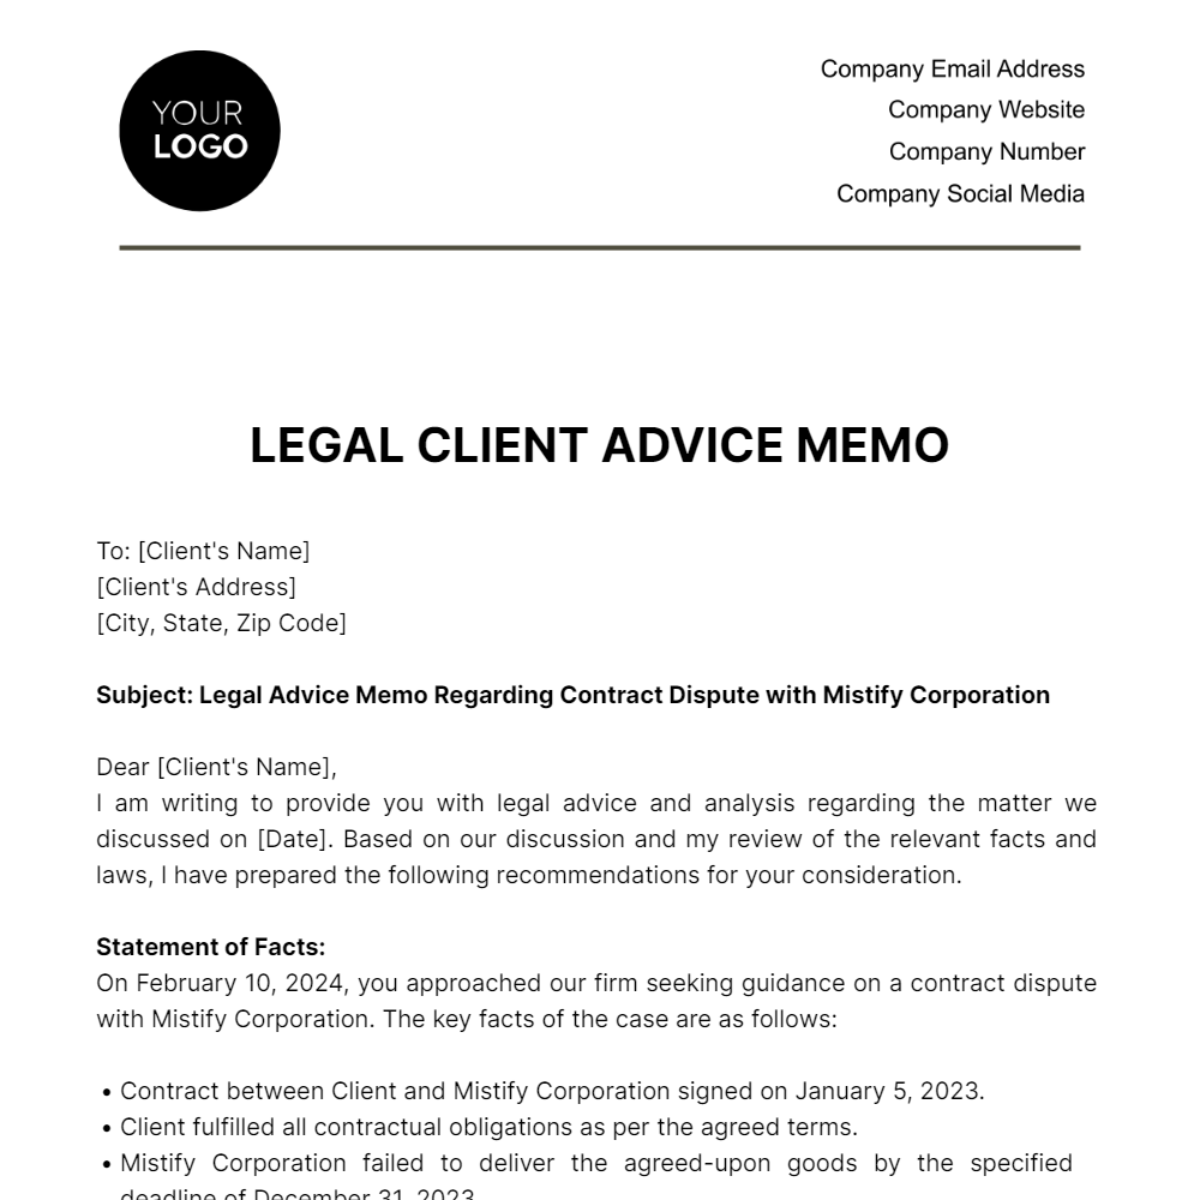 Free Legal Client Advice Memo Template